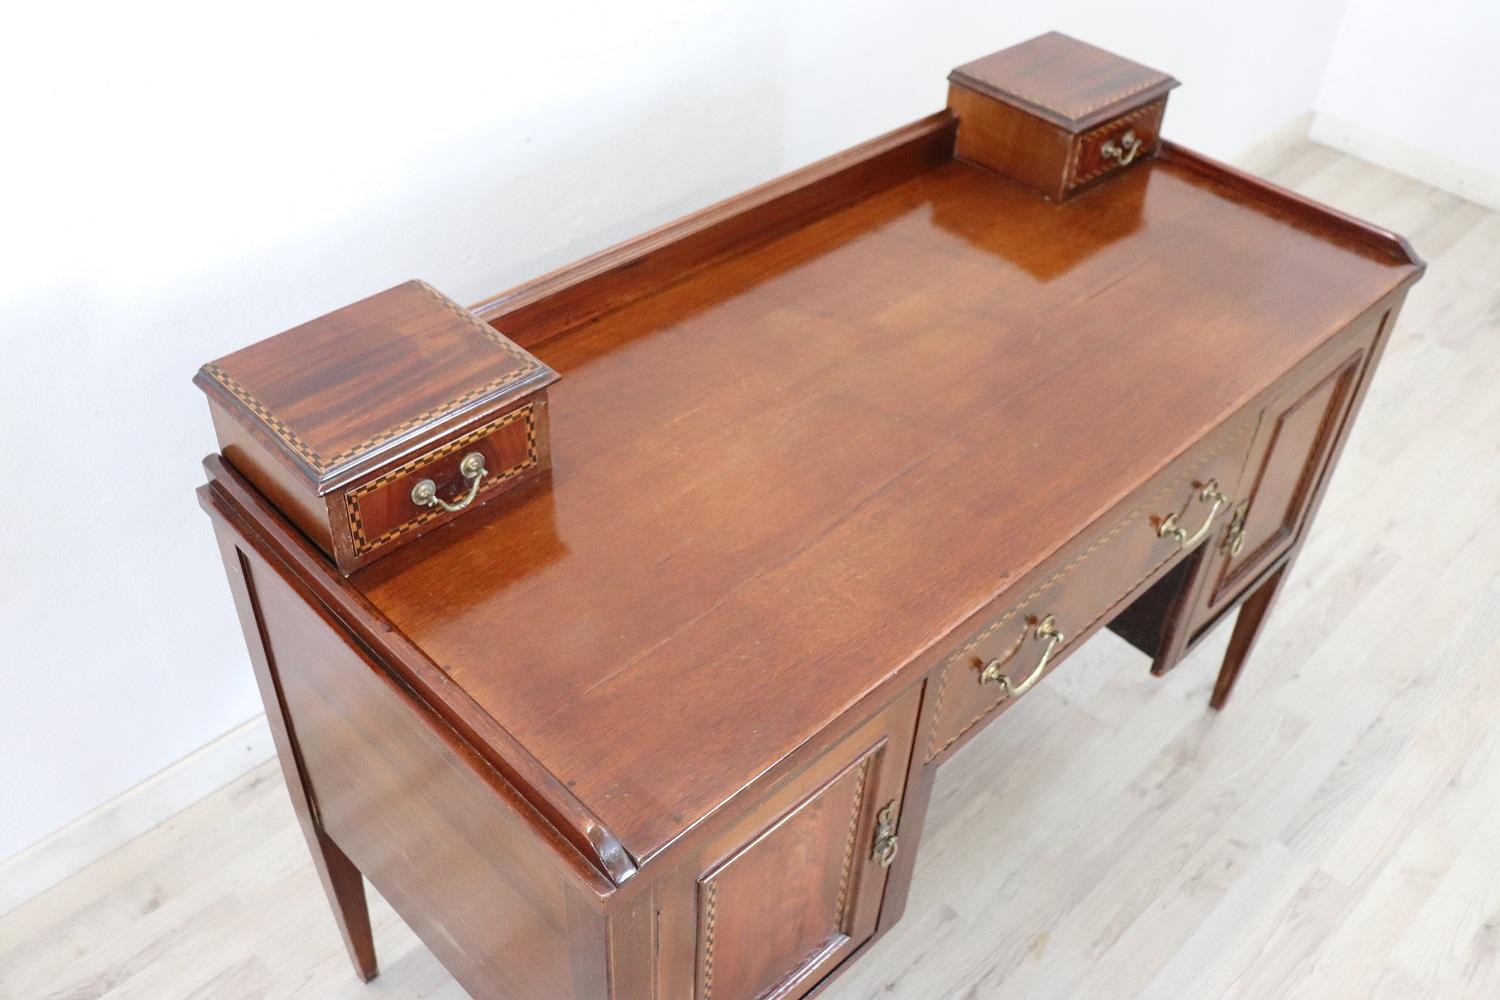 Early 20th century beautiful italian Louis XVI style writing desk. In precious mahogany wood with refined geometric inlay decoration. The very simple line equipped with drawers and doors.